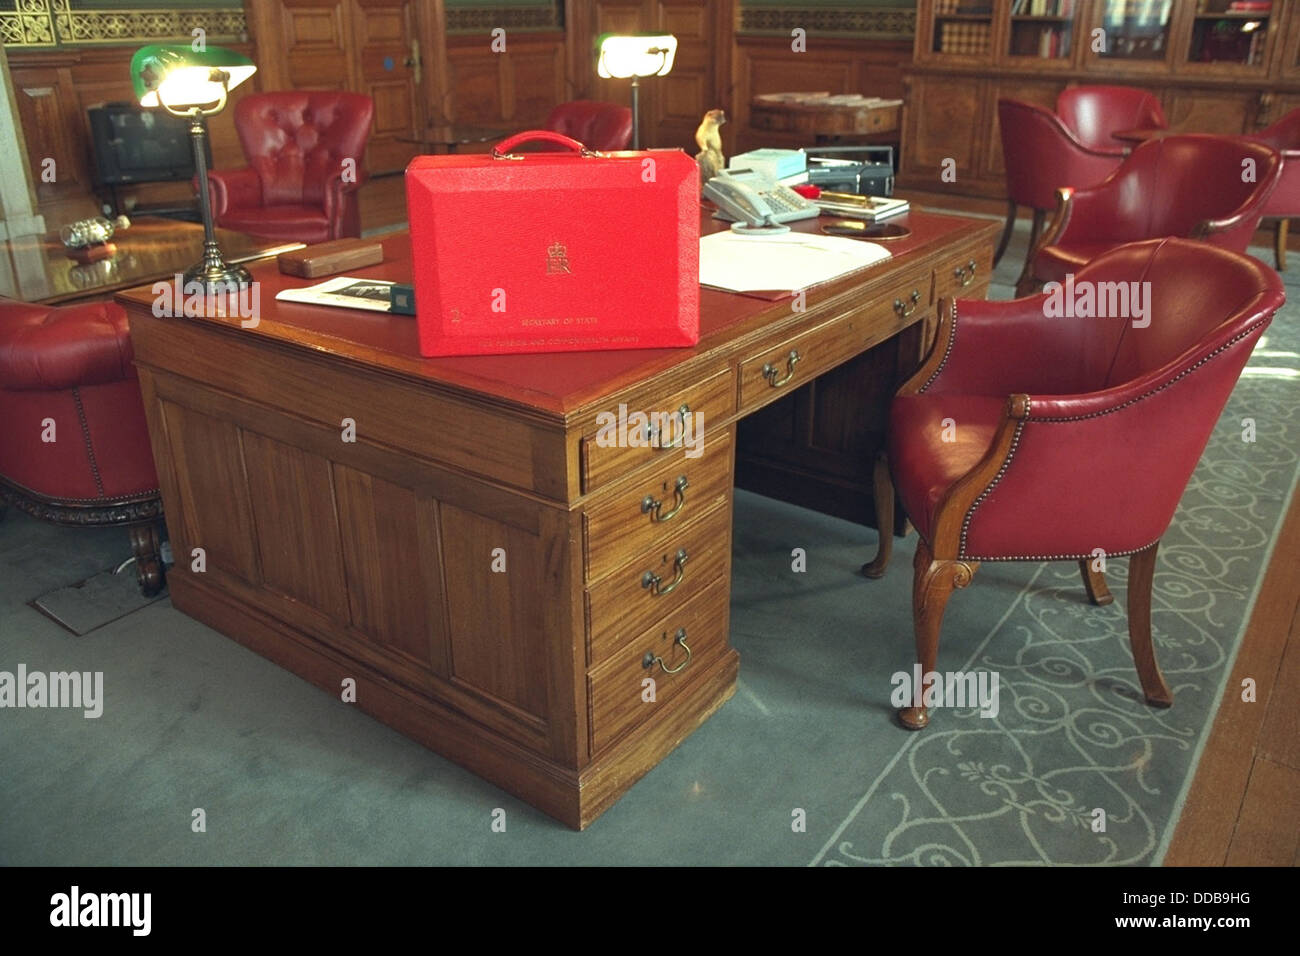 Ministerial 'Red Box' briefcase in the Locarno Suite at The Foreign Office, Whitehall, London, UK Stock Photo